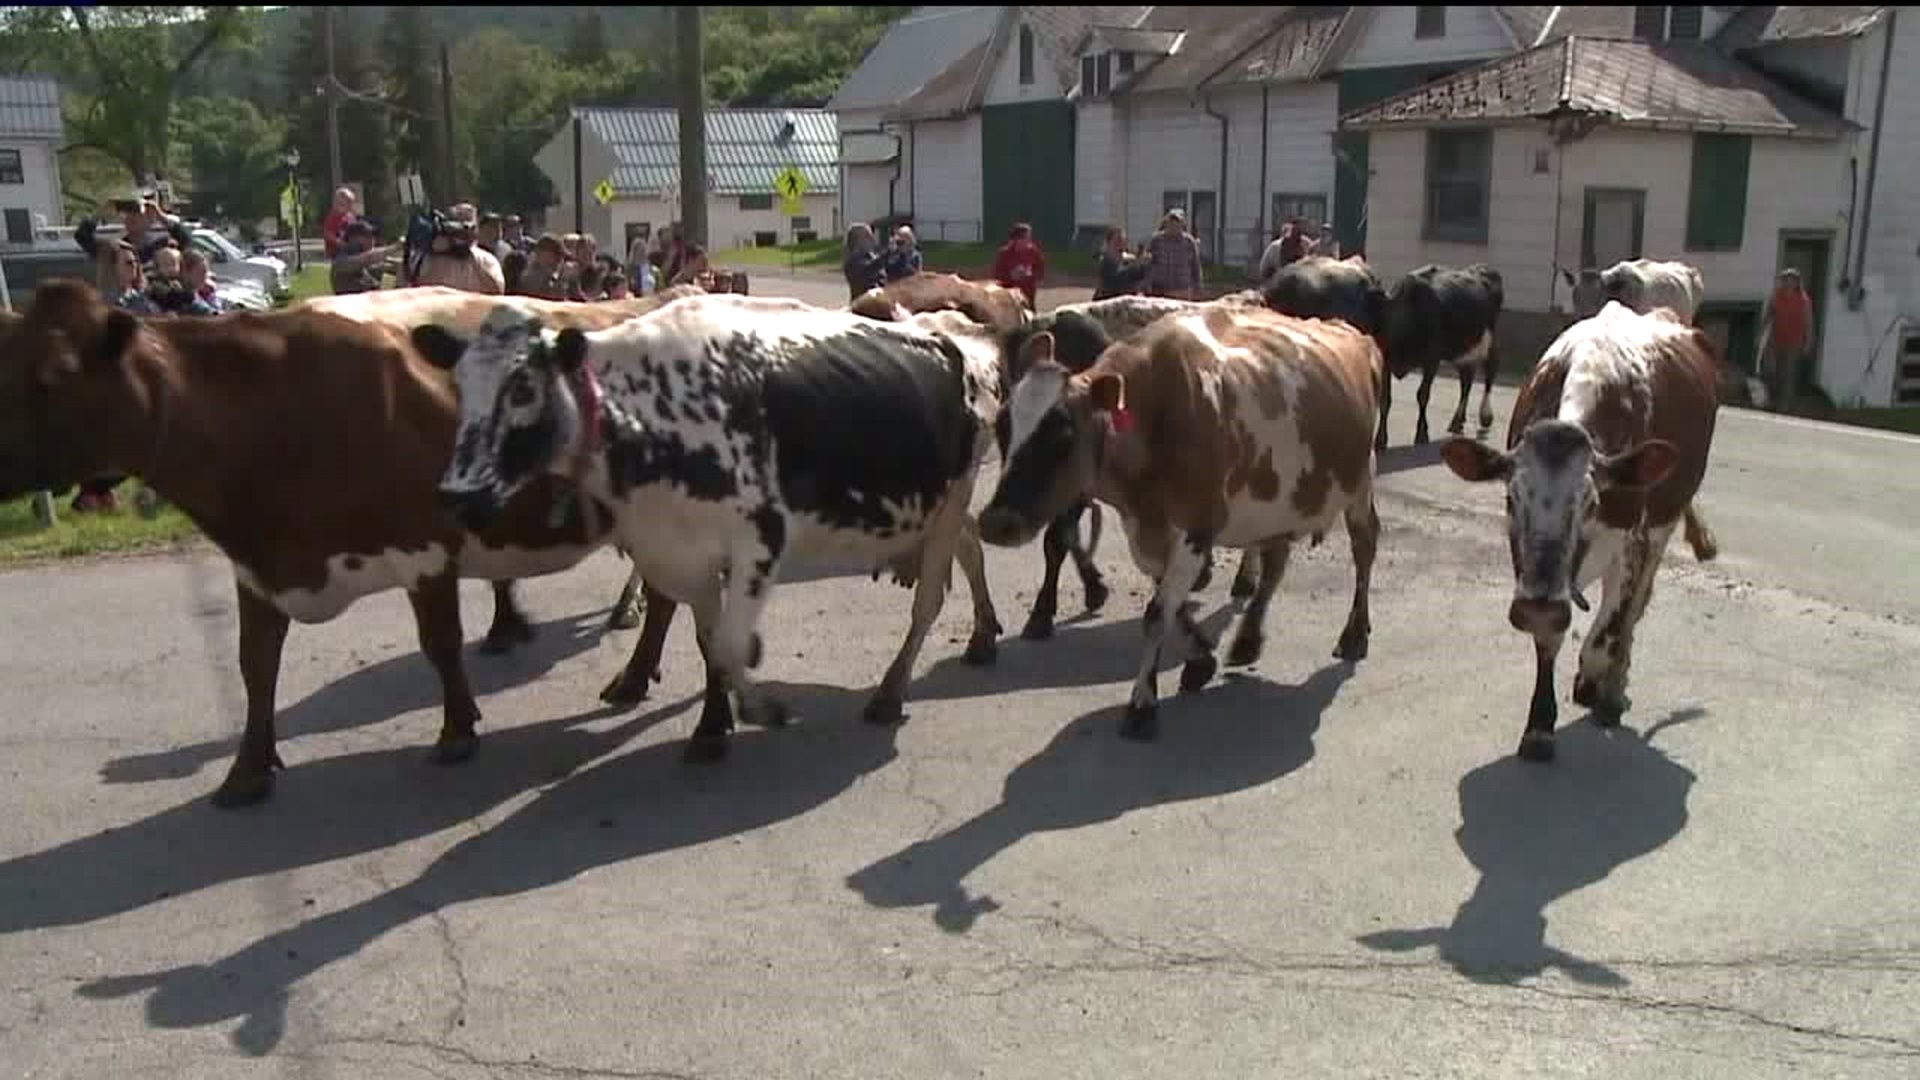 Final Crossing of the Cows at Hillside Farms